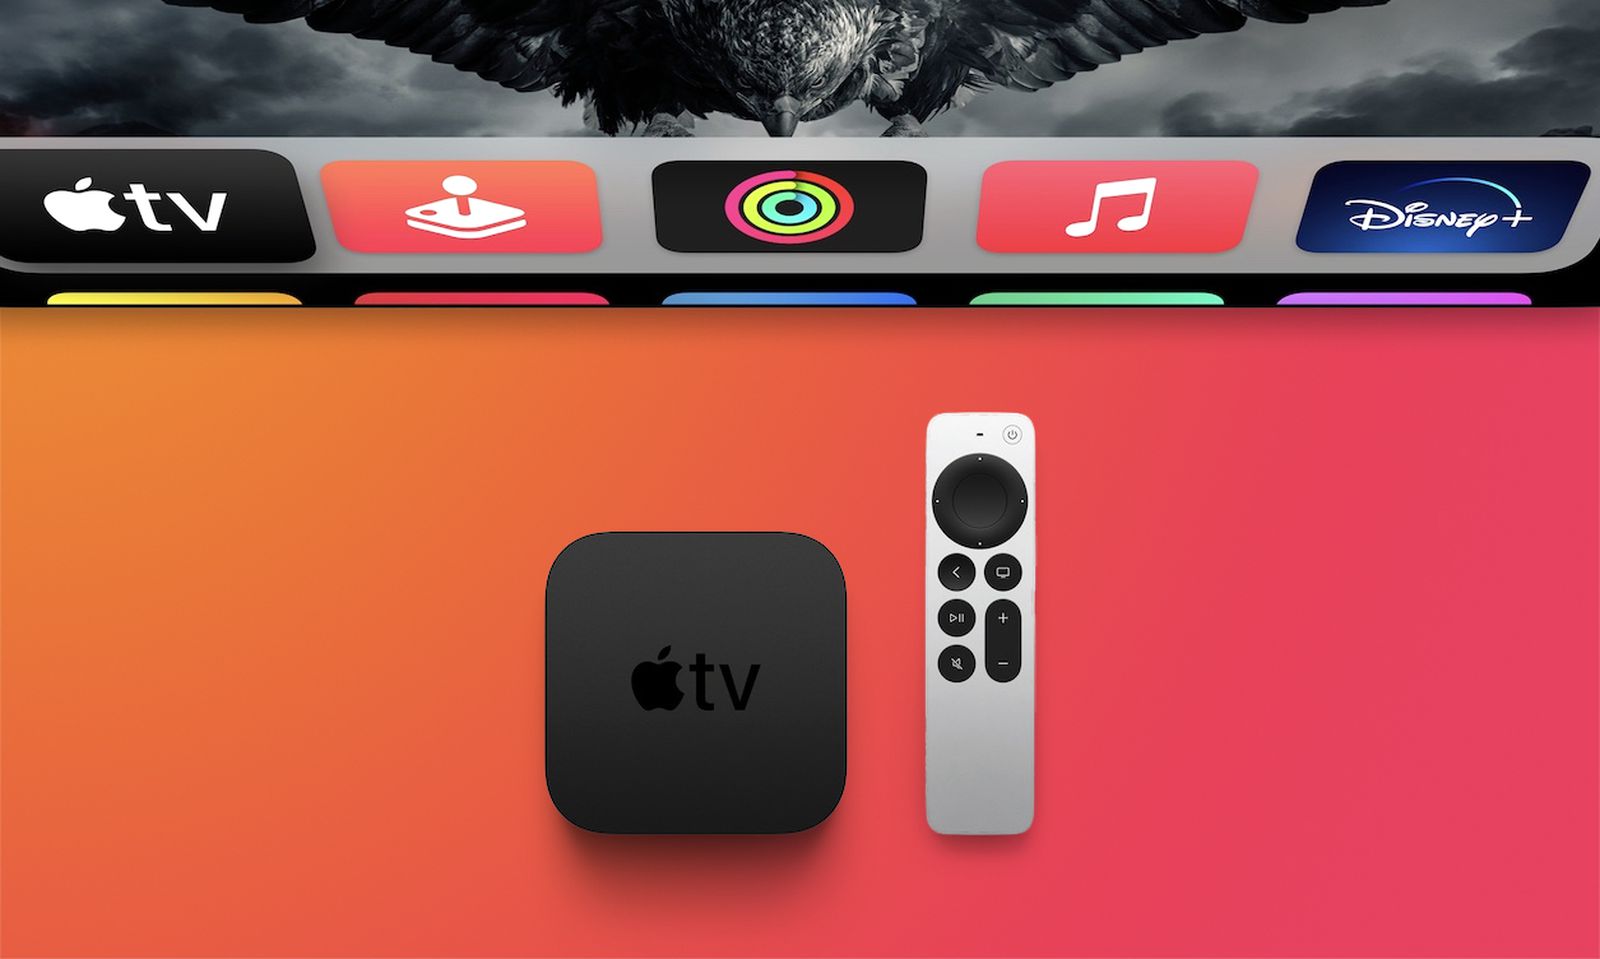 What's Next for Apple TV: A14 Chip, 4GB RAM, New Siri Remote, and More Rumors